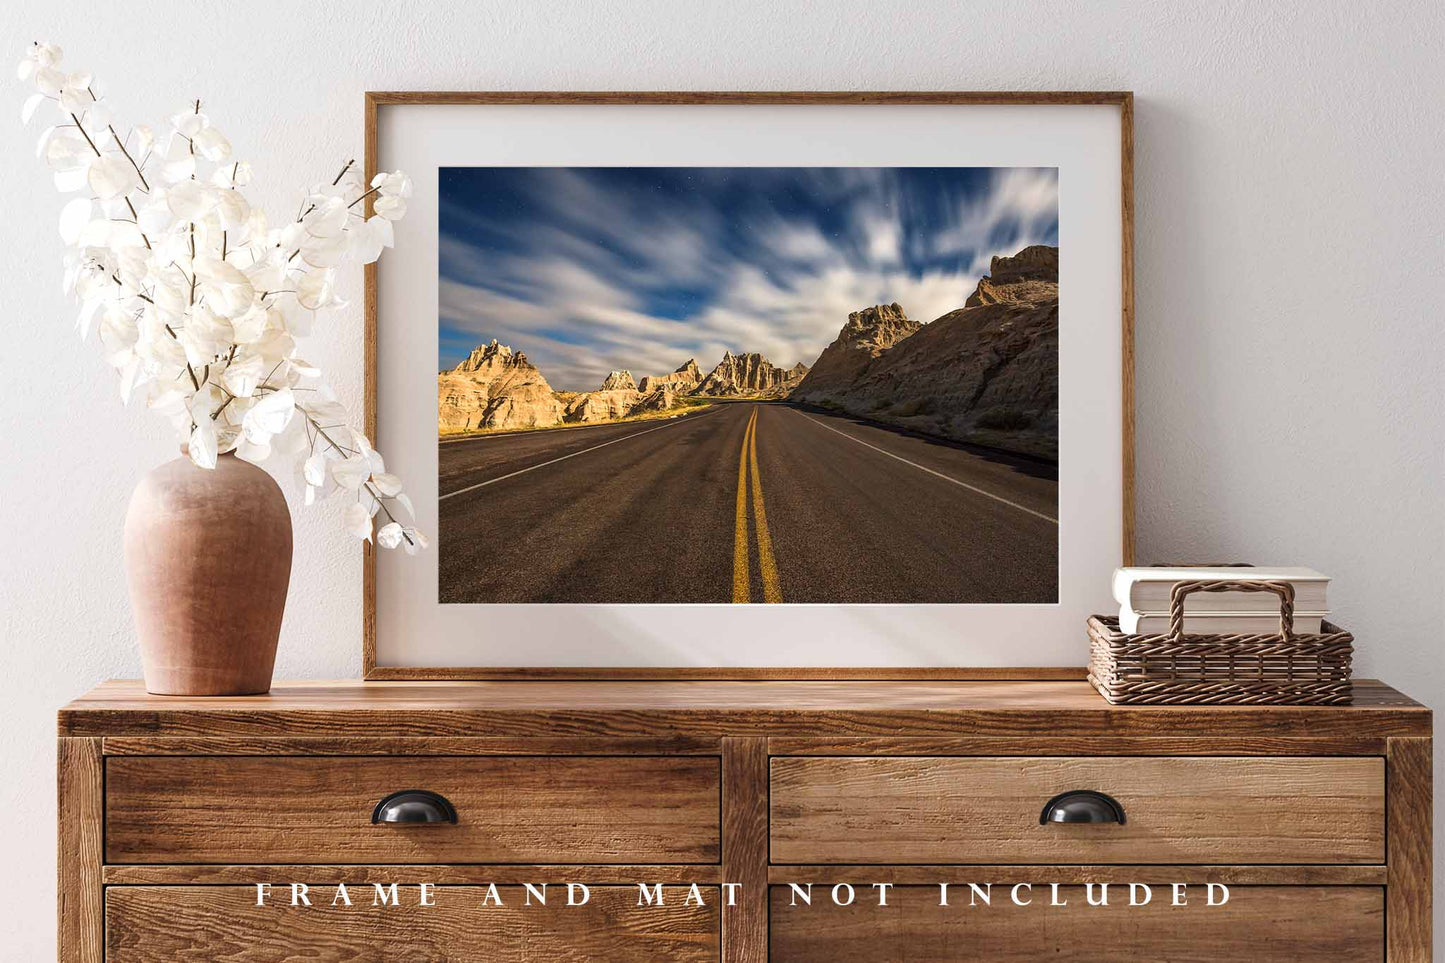 Road Trip Photography Print (Not Framed) Picture of Highway Leading Through Pinnacles in Badlands National Park South Dakota Travel Wall Art Wanderlust Decor